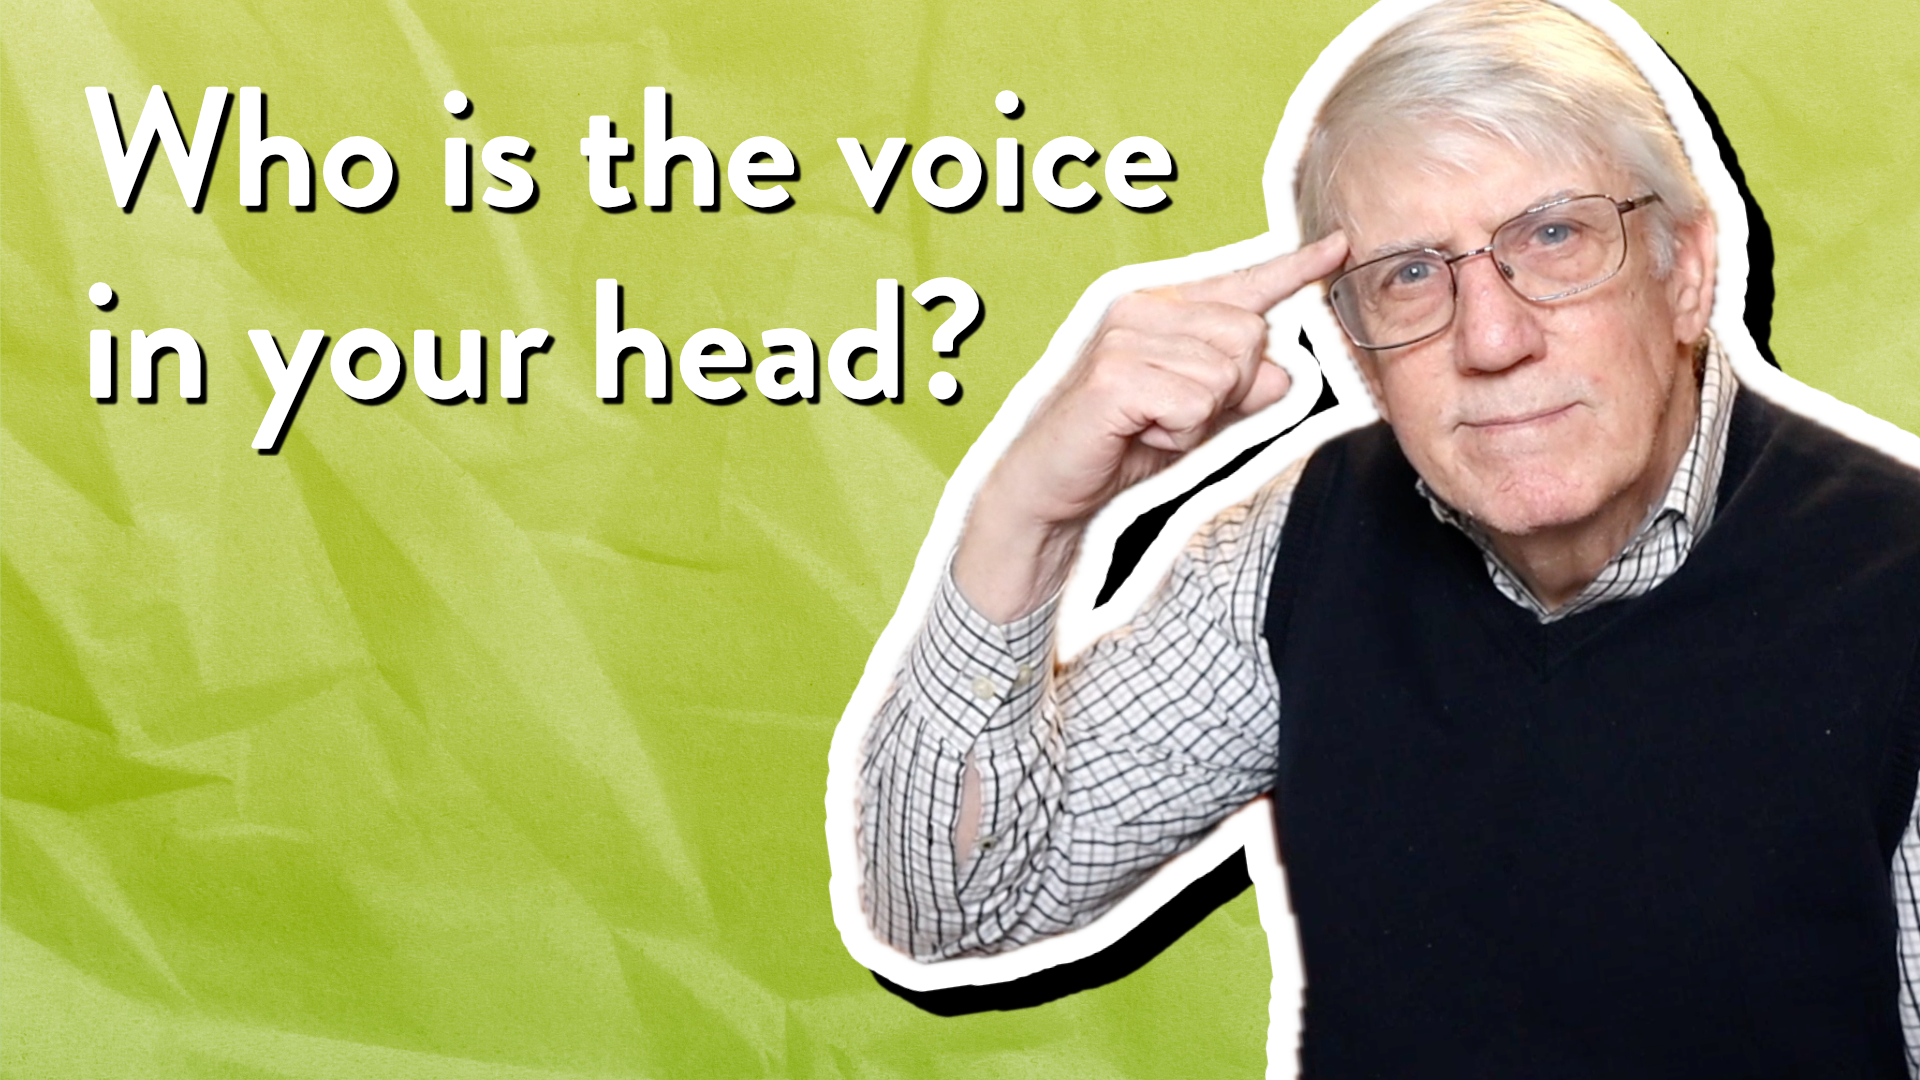 Who is the voice in your head?